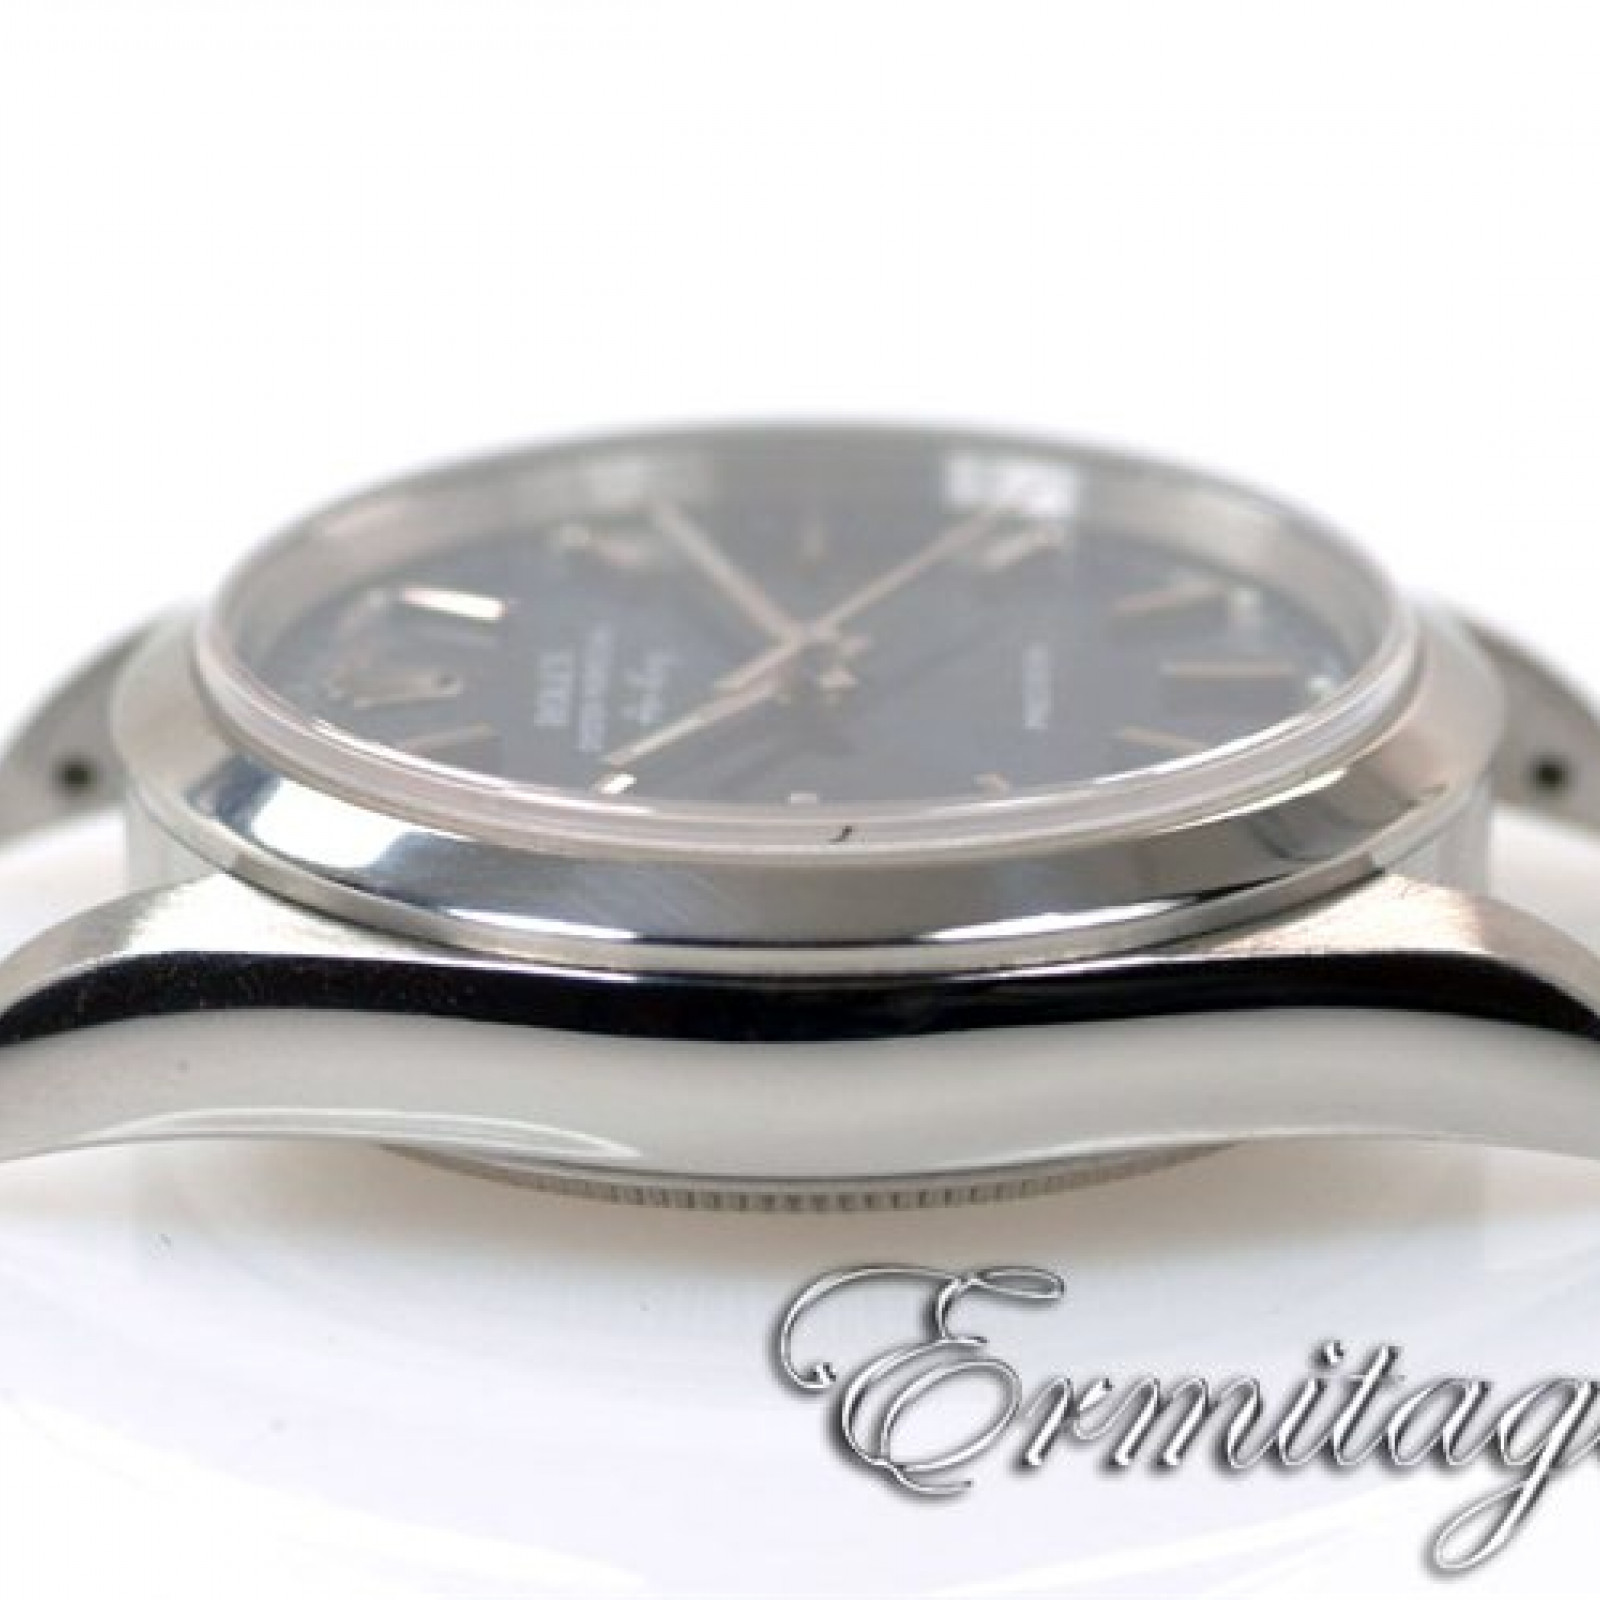 Pre-Owned Rolex Air King 14000 Steel Year 2000